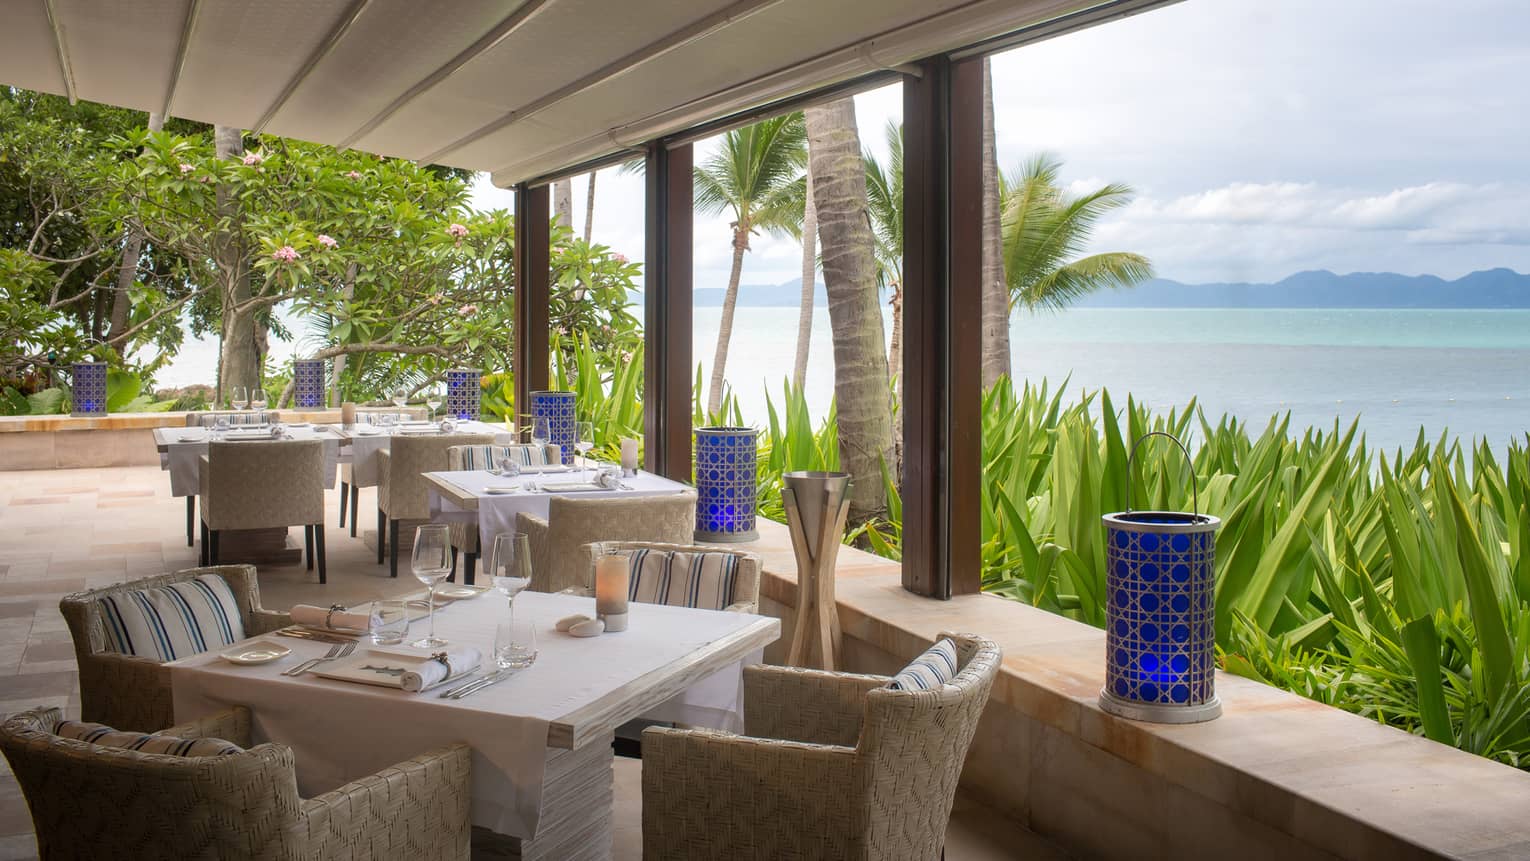 square tables overlooking the ocean are set for dinner